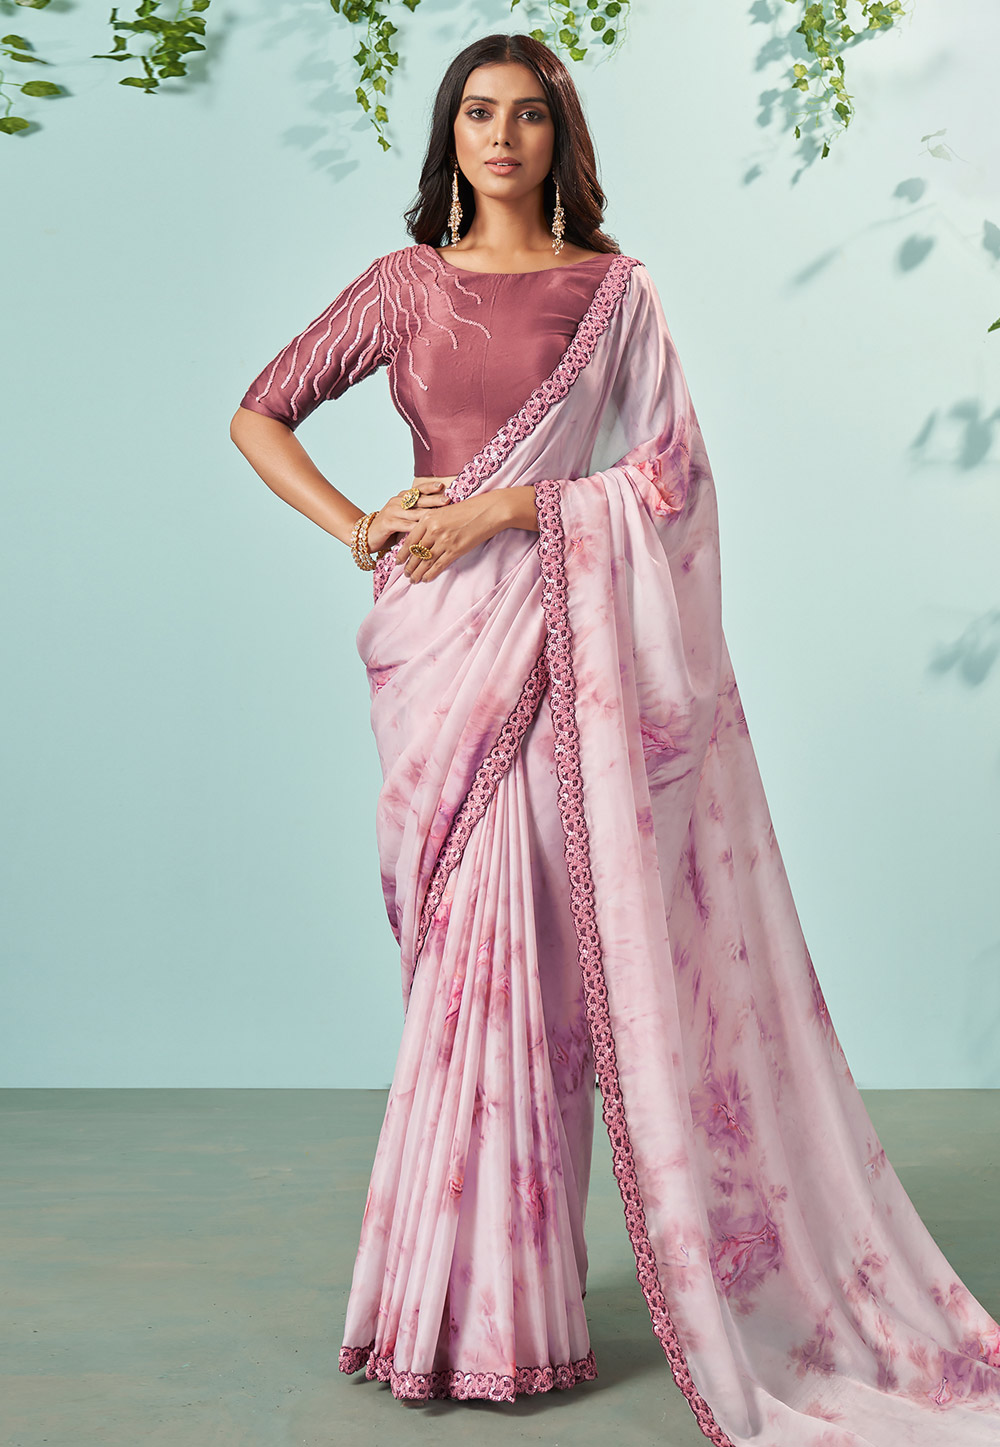 Baby Pink Saree Blouse with Plunging Neckline and Full Sleeves | TEHHO –  Blu99 Store